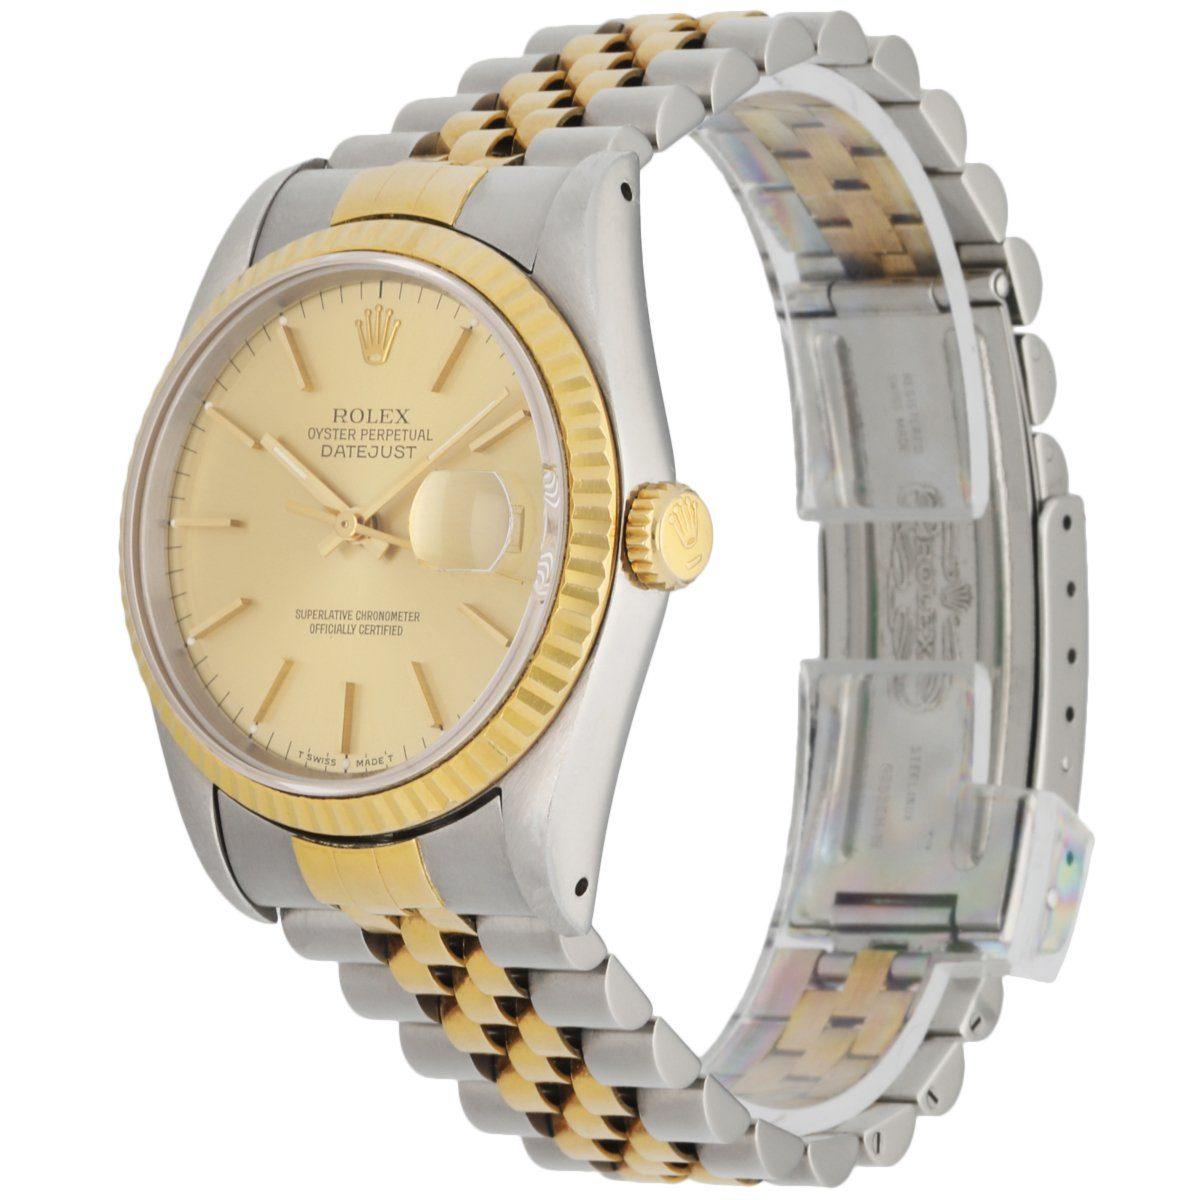 Rolex Datejust 16233 Men's Watch. 36mm Stainless Steel case. 18K Yellow GoldÂ fluted bezel.Â ChampagneÂ dial with gold luminous hands and gold index hour markers. Minute markers on the outer dial. Date display at the 3 o'clock position. Stainless